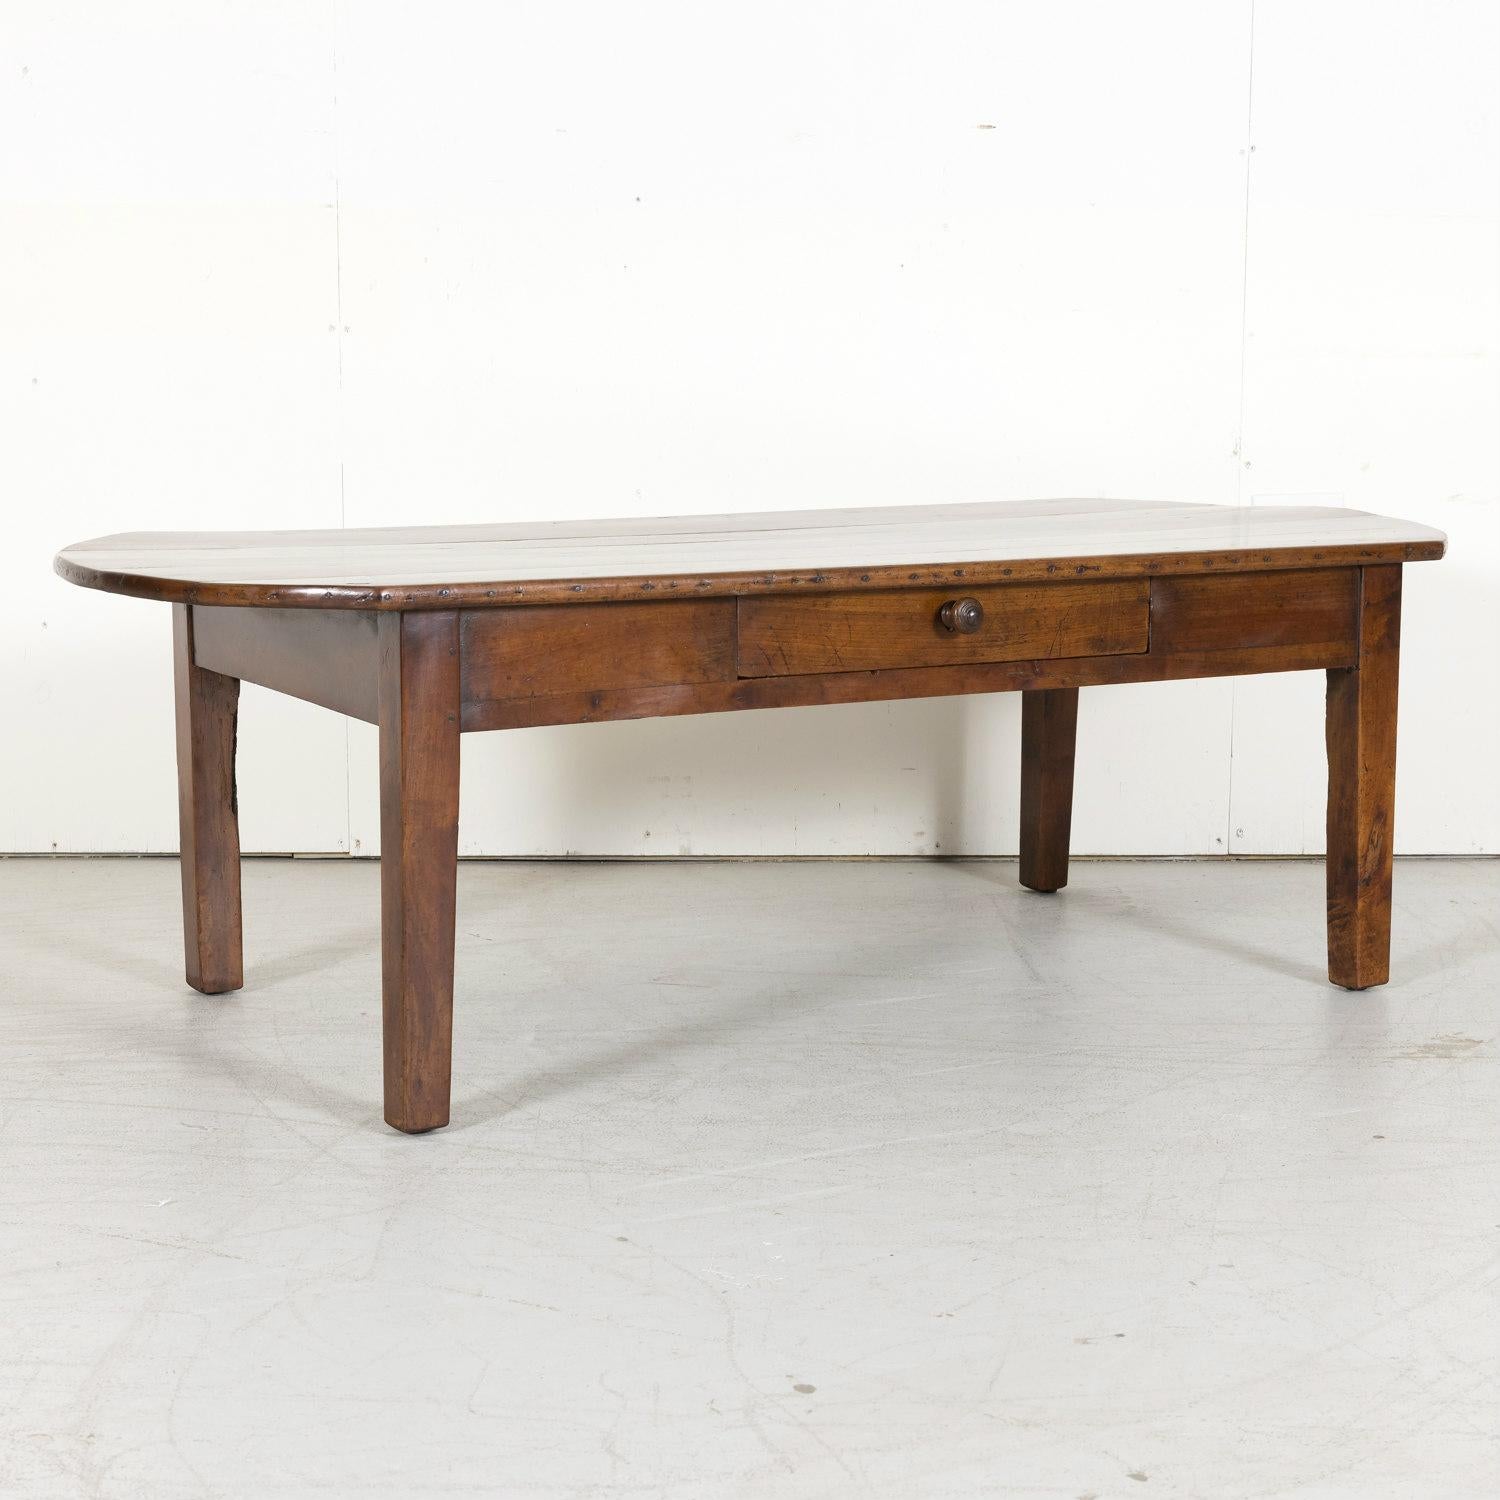 A large 19th century Country French coffee table handcrafted of solid cherry in Normandy, having a wide oval plank top over a single apron drawer, circa 1870s. Raised on square, tapered legs.This rustic, provincial coffee table has a wonderful color